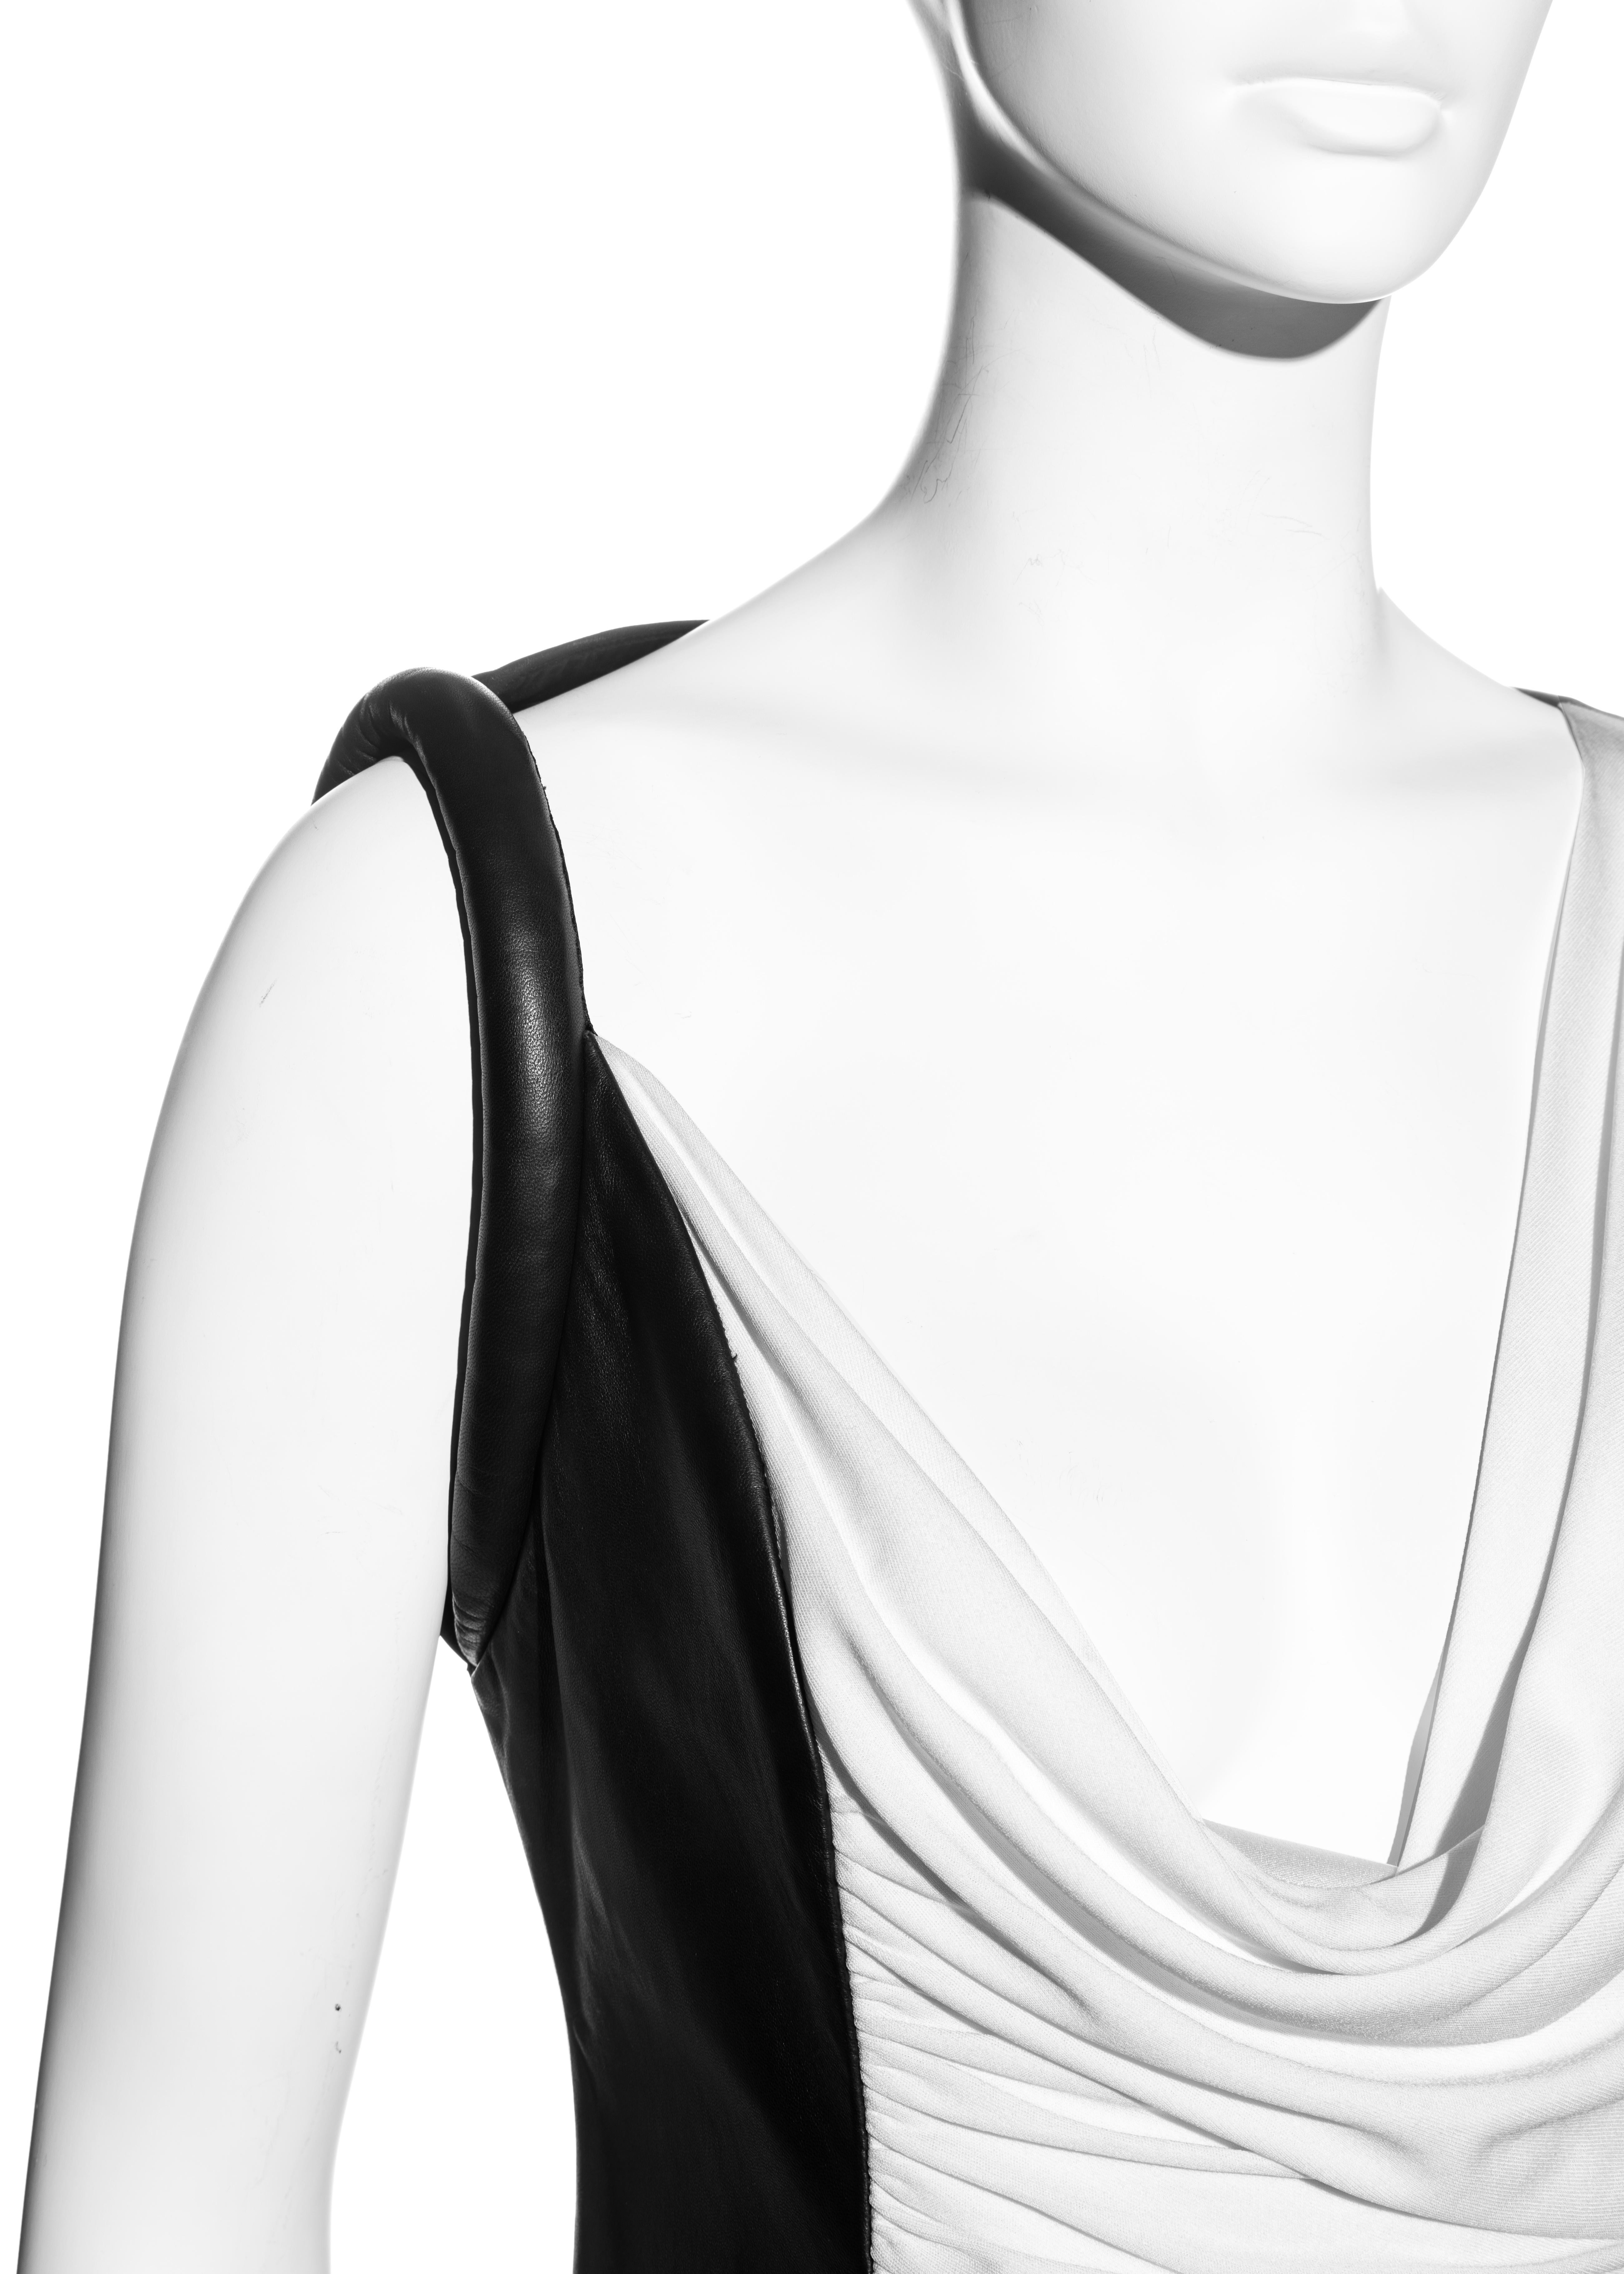 Gray Gianni Versace black and white leather and rayon evening dress, fw 1997 For Sale